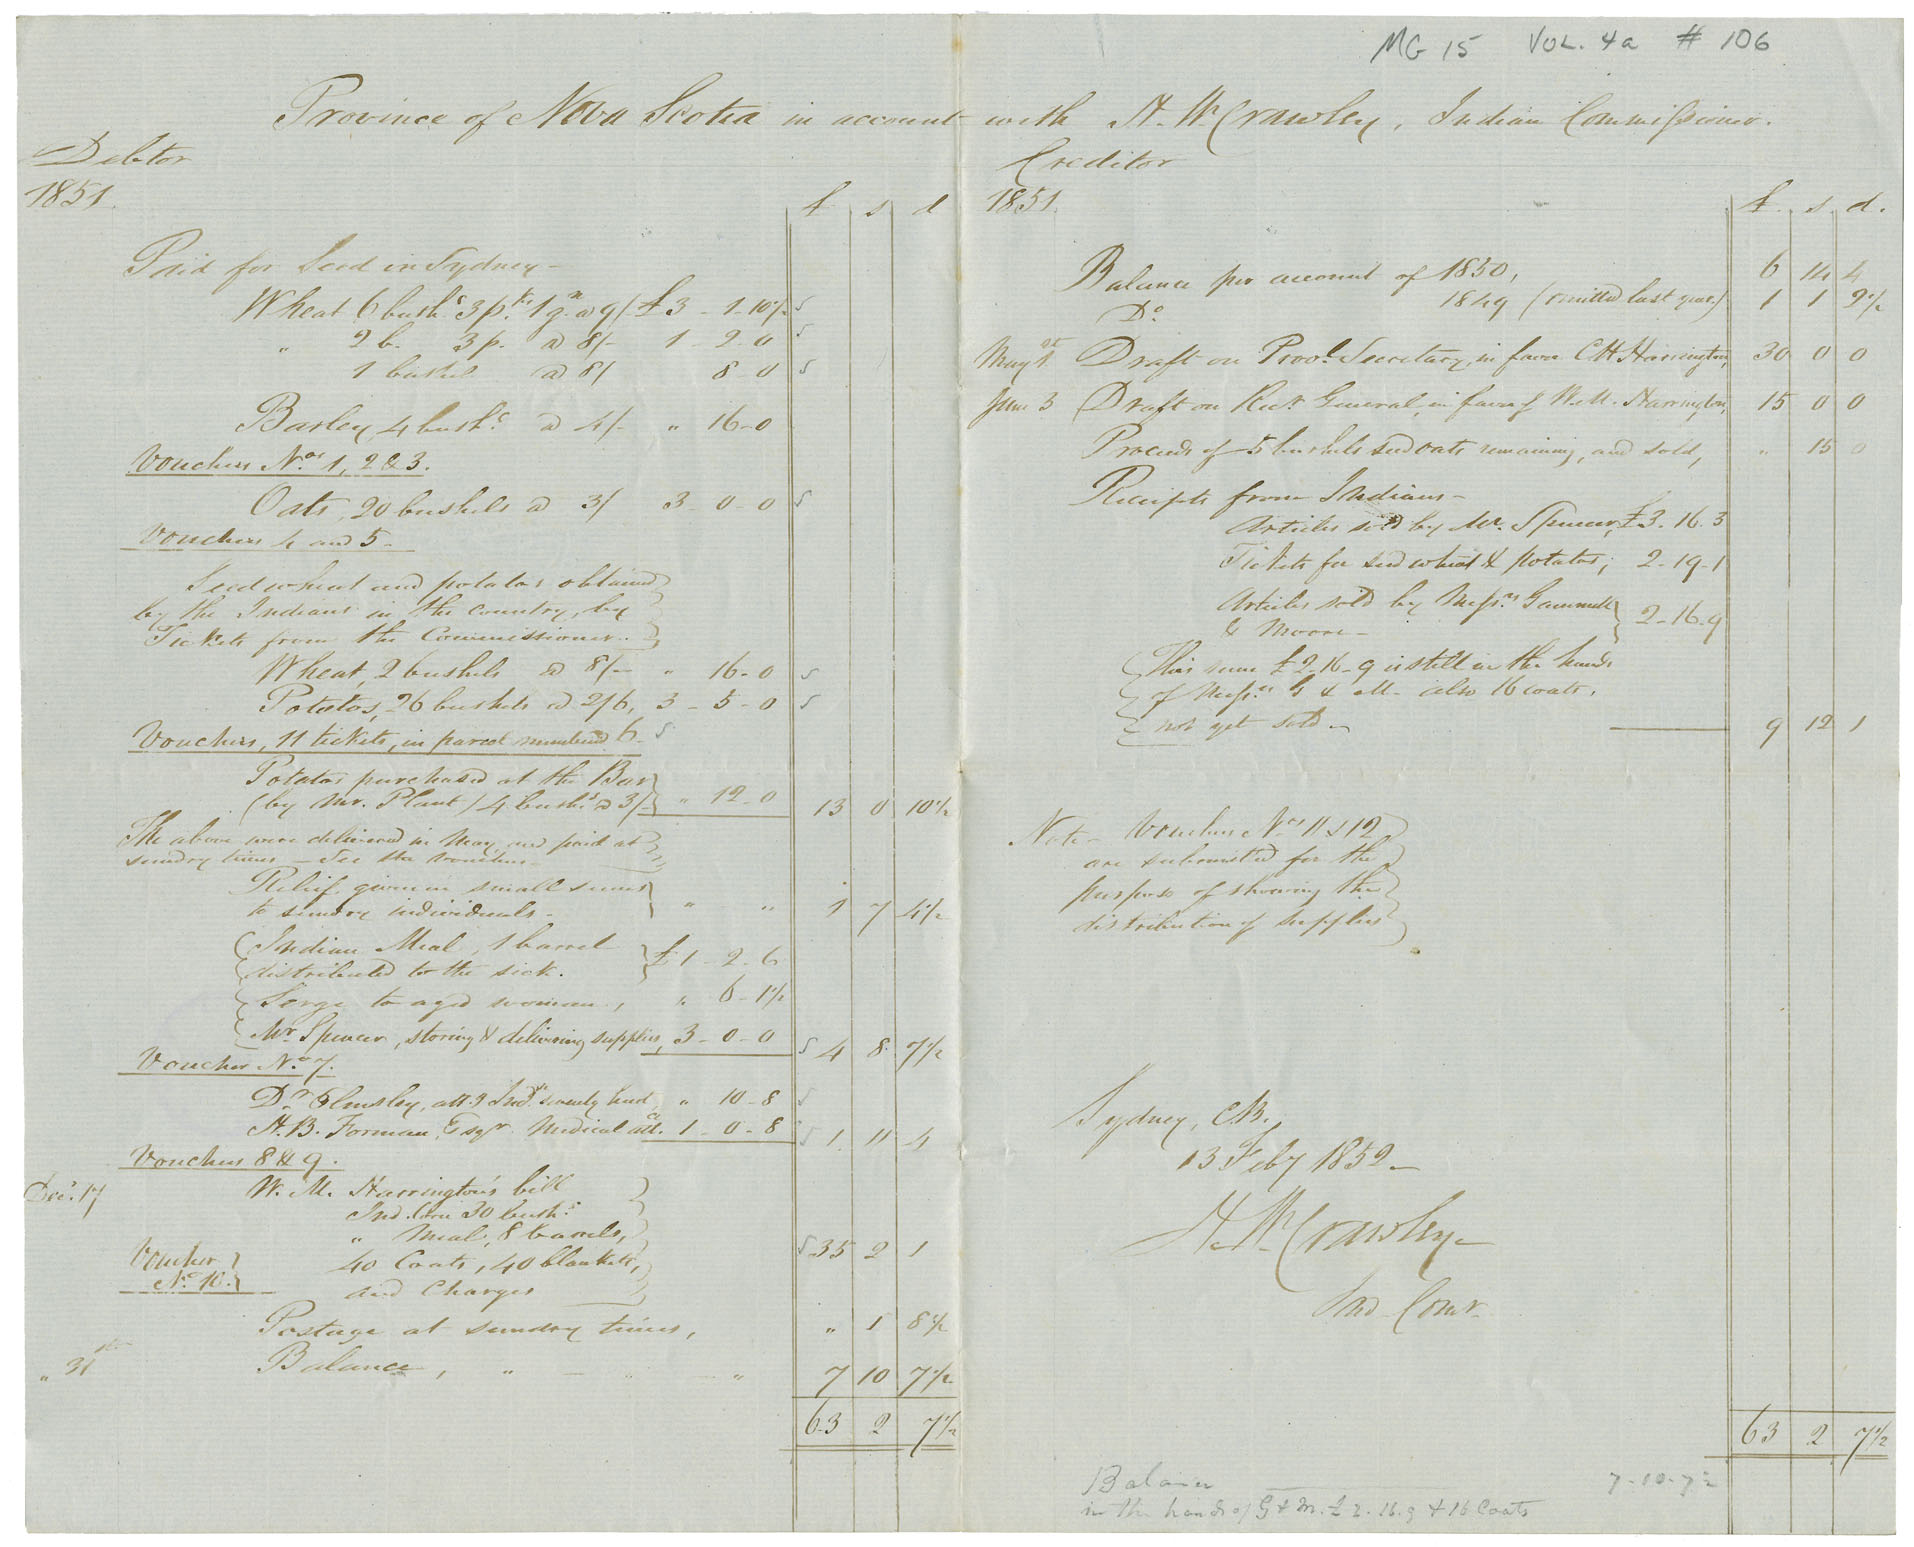 Account of receipts and expenditures on Nova Scotia Mi'kmaq for year 1851.